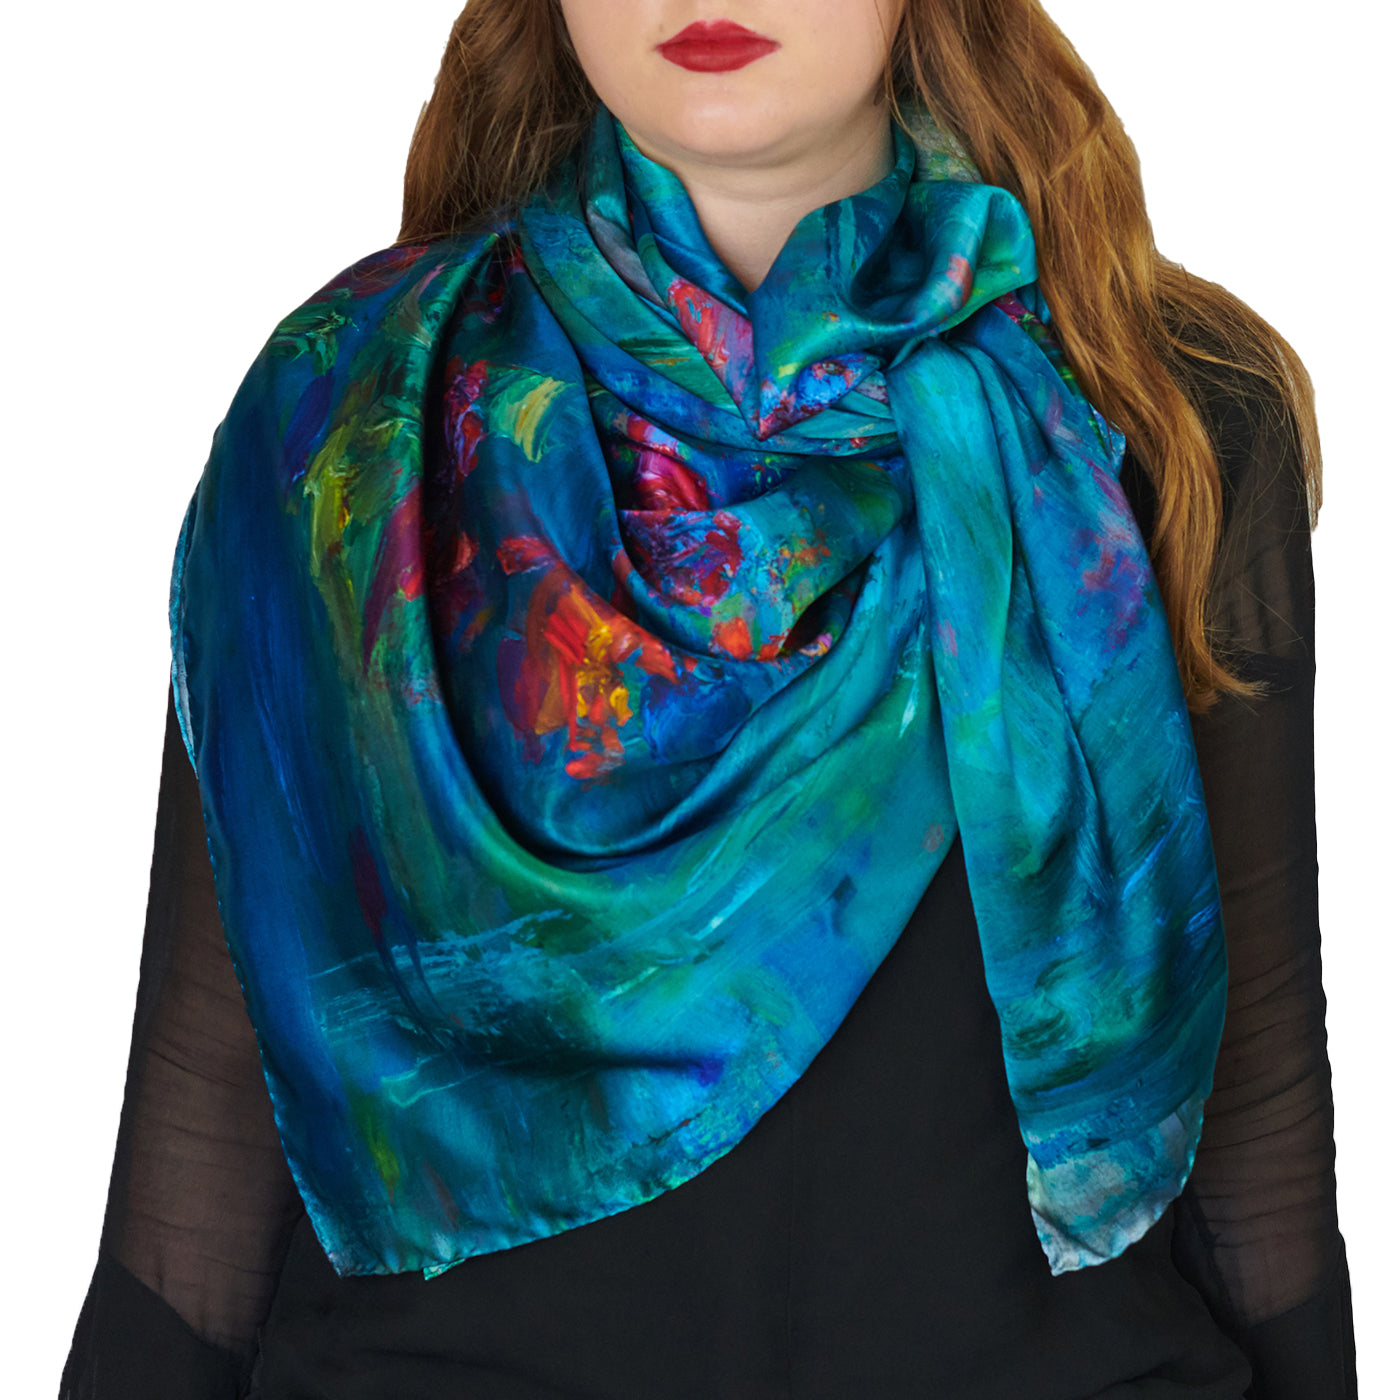 Silk Scarves Online Shop - Hand Painted Silk Scarf. Olive, Navy Blue,  Turquoise, White Handmade Silk Scarf DENIM CHIC. Silk Scarves Colorado.  Extra-Large 35x35 square. Holidays